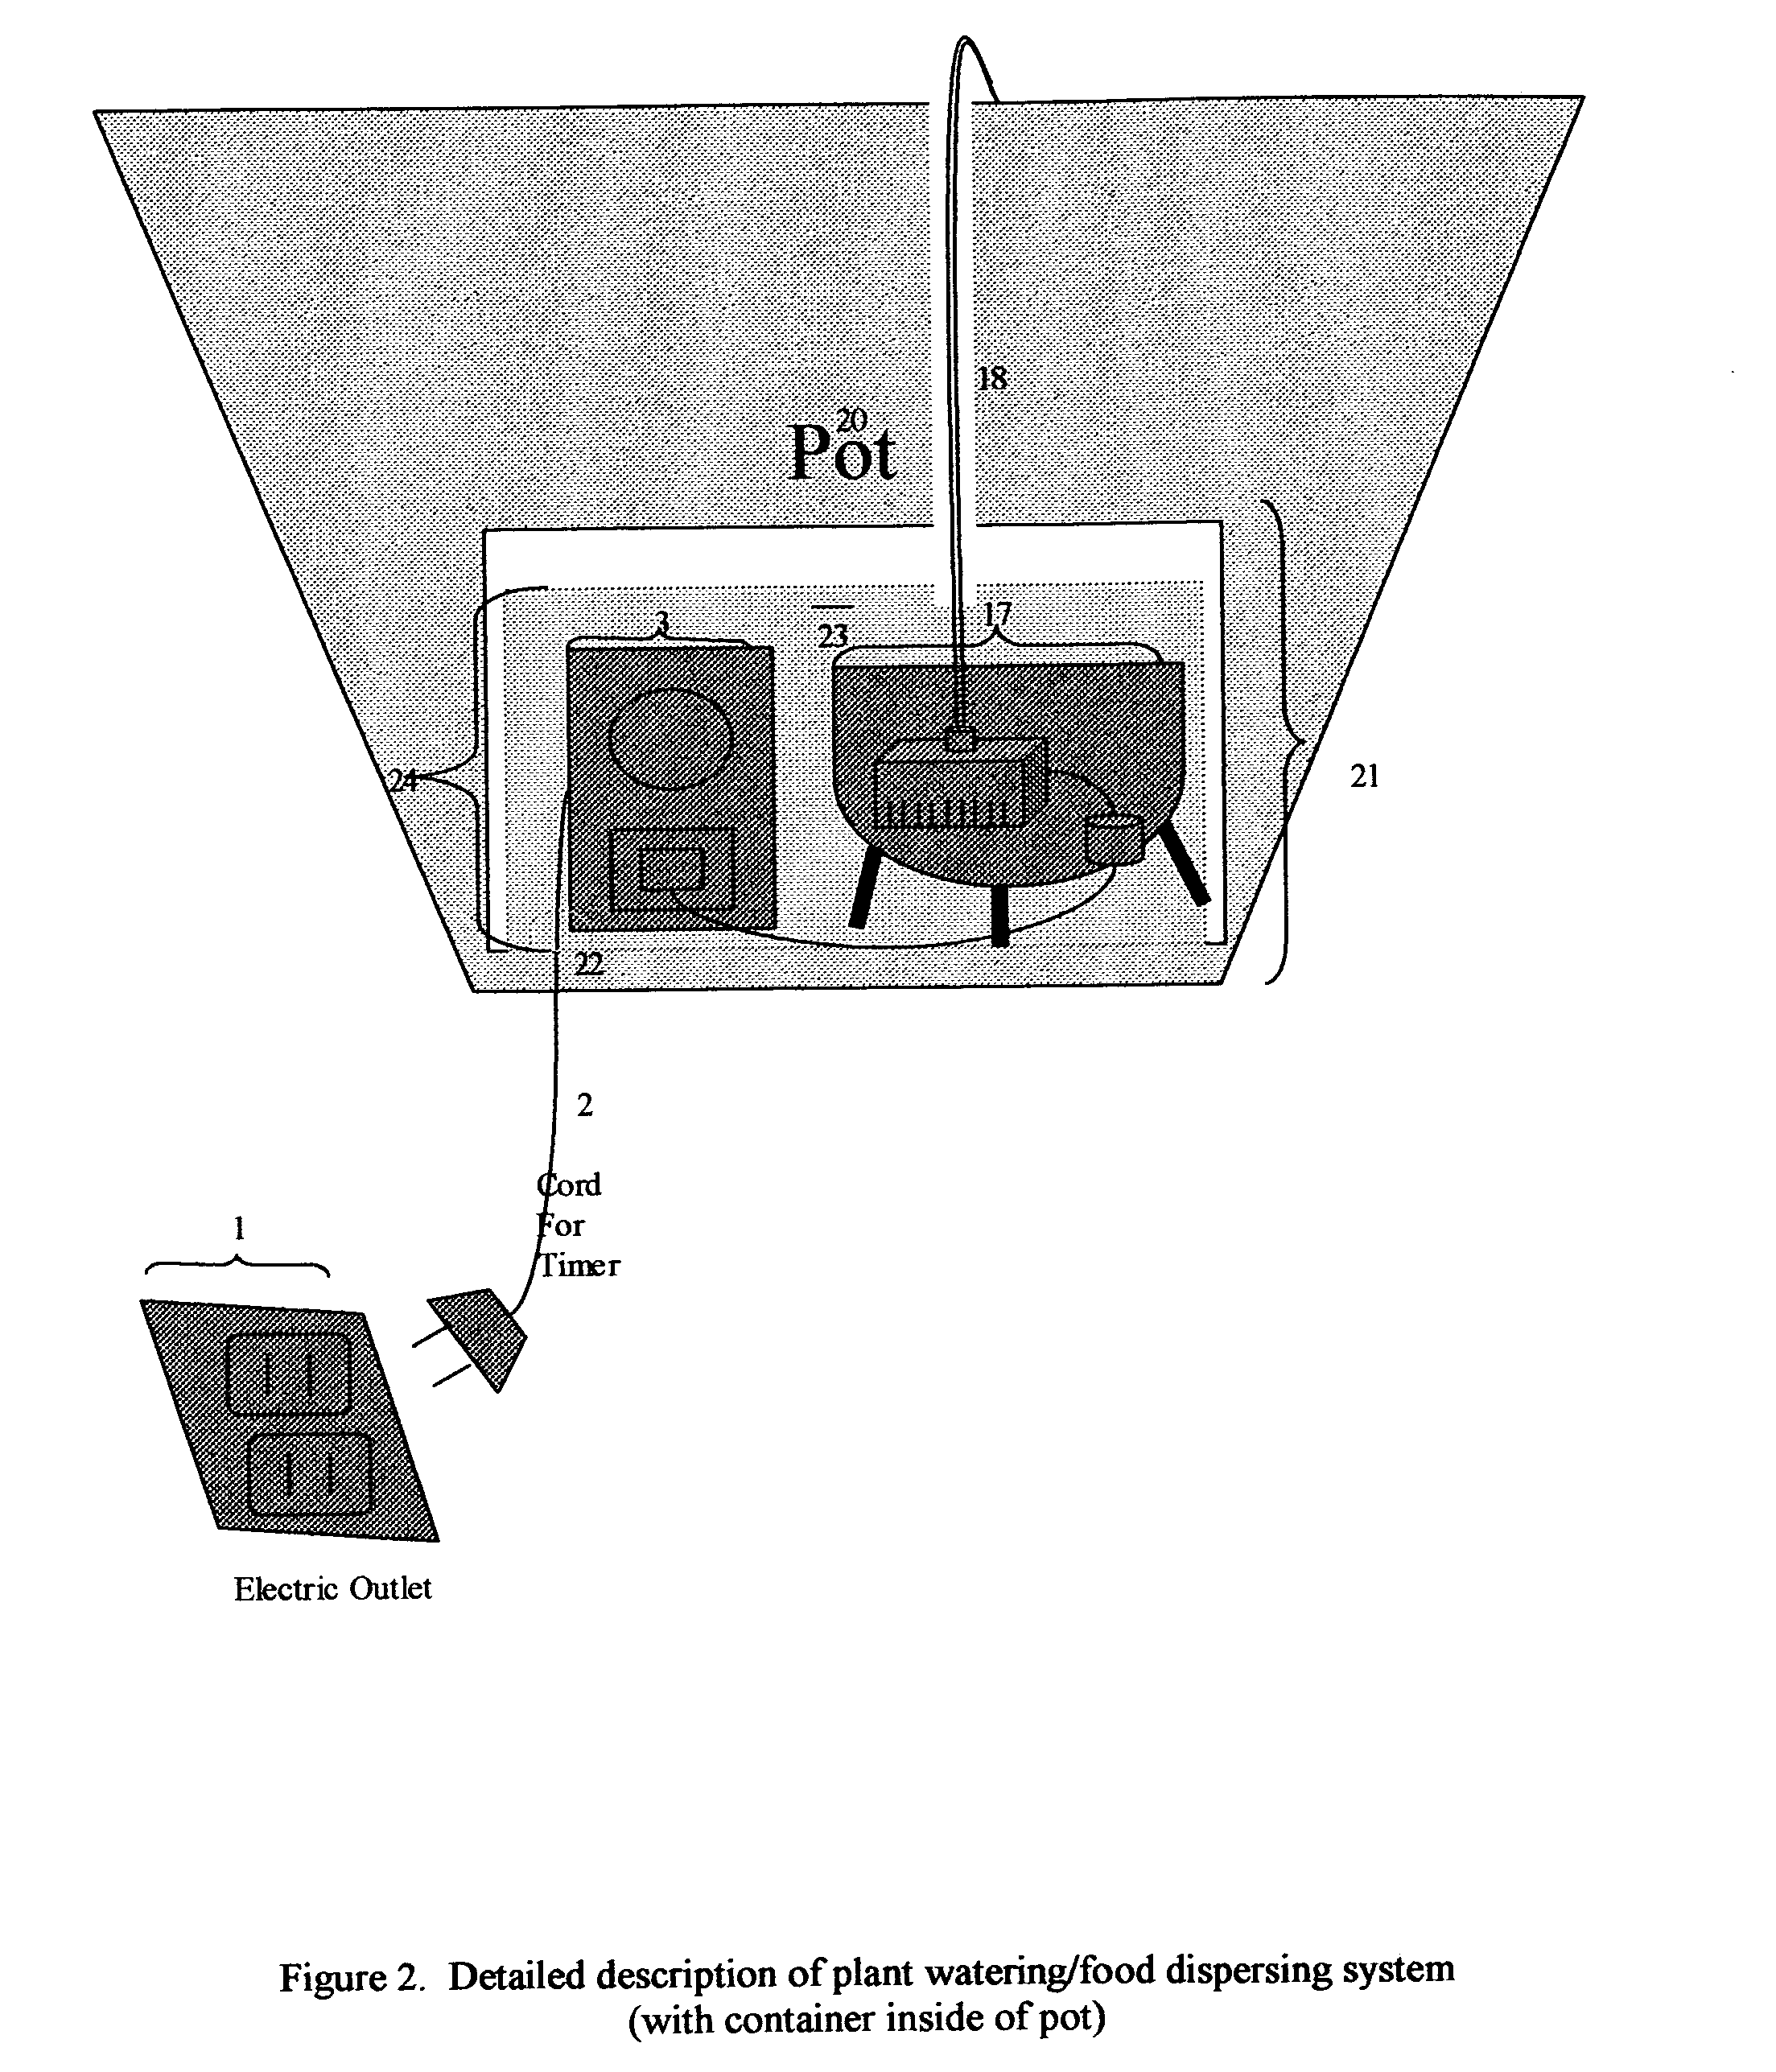 Plant watering/food dispersing system